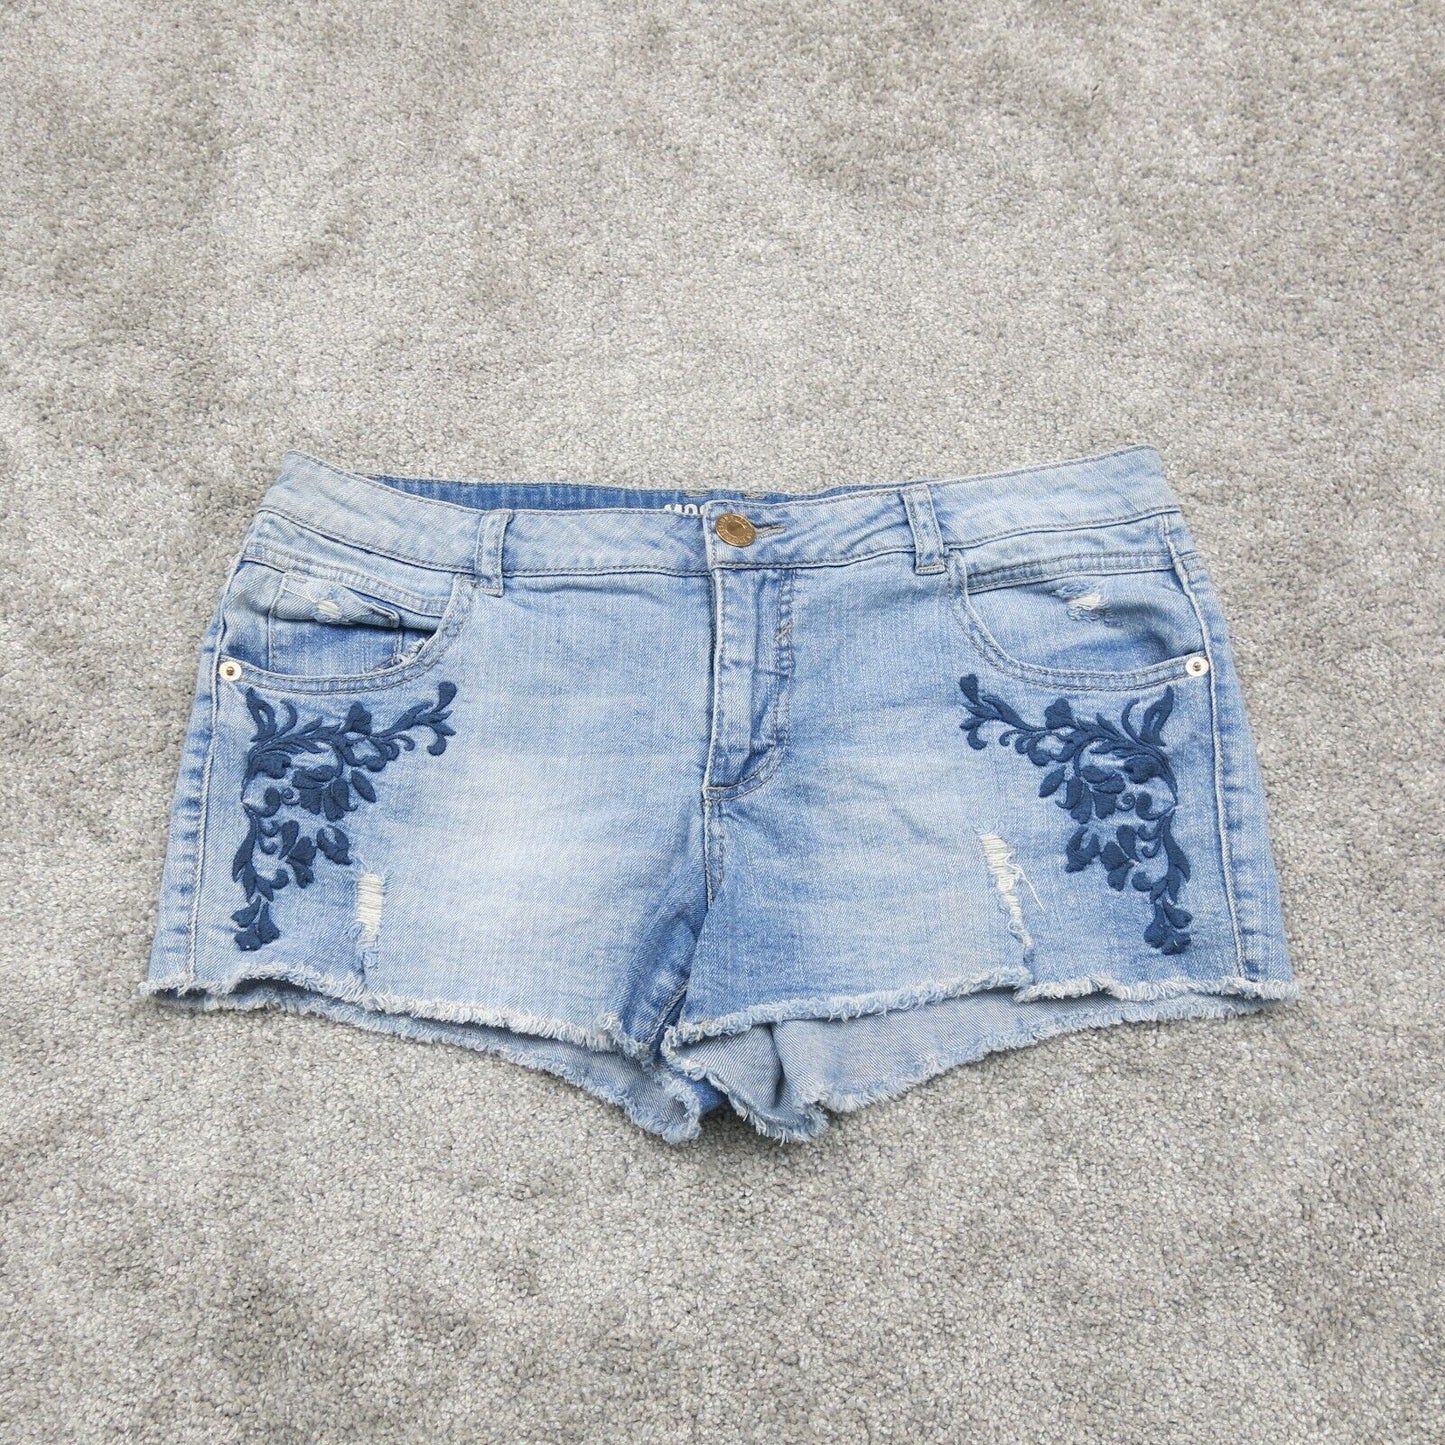 Mossimo Womens Cut-Off Shorts Denim Low Rise Embroidered Zip LT Wash Blue SZ 15